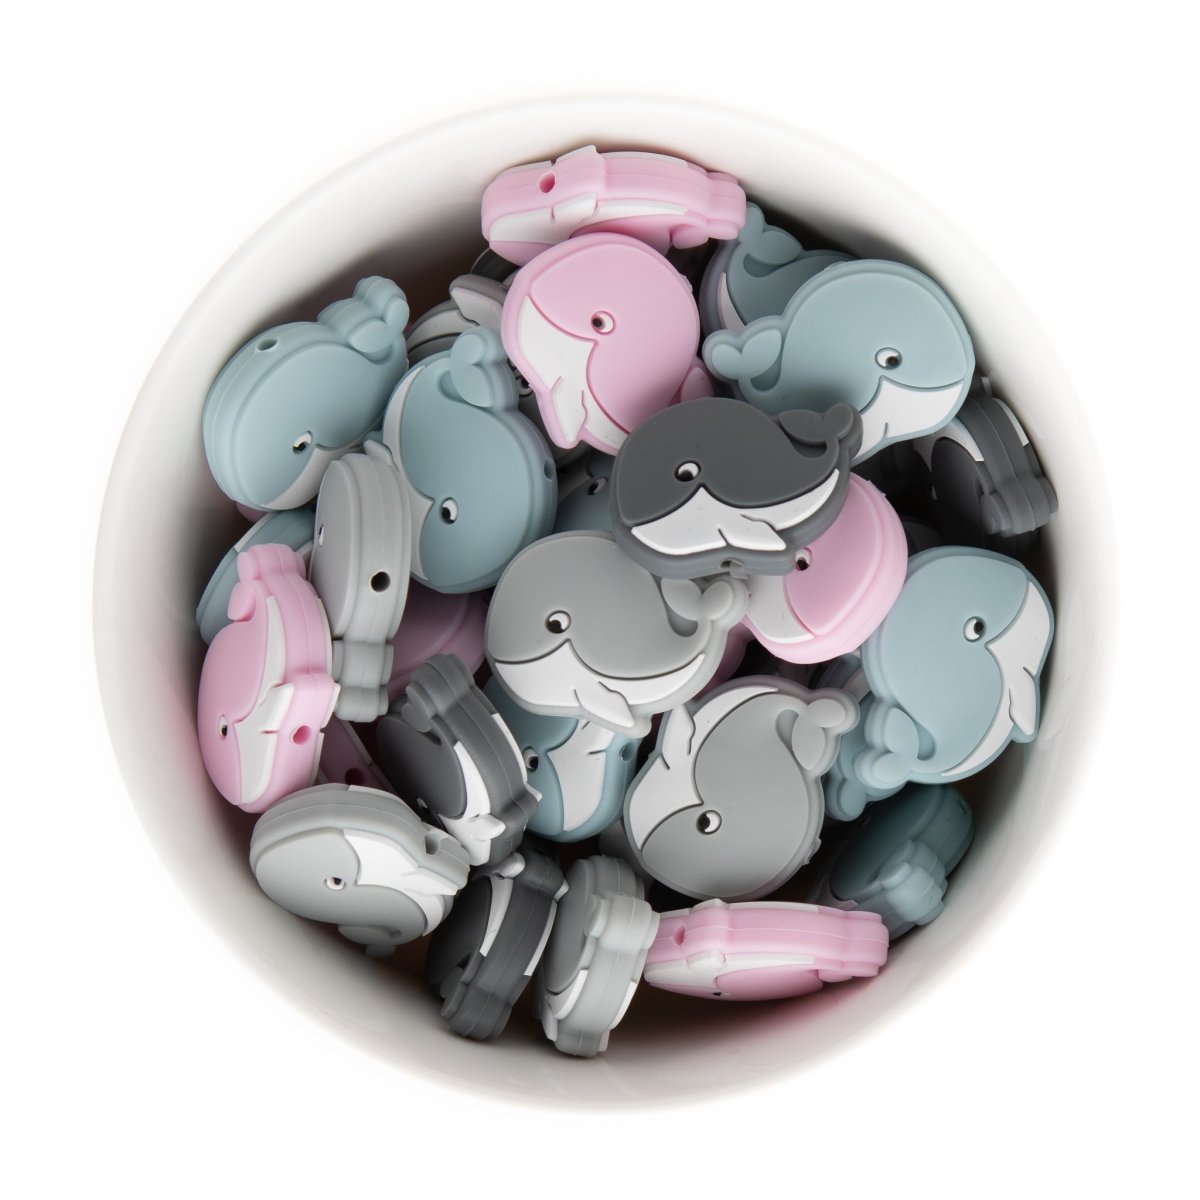 Silicone Focal Beads Whales Charcoal Grey from Cara & Co Craft Supply